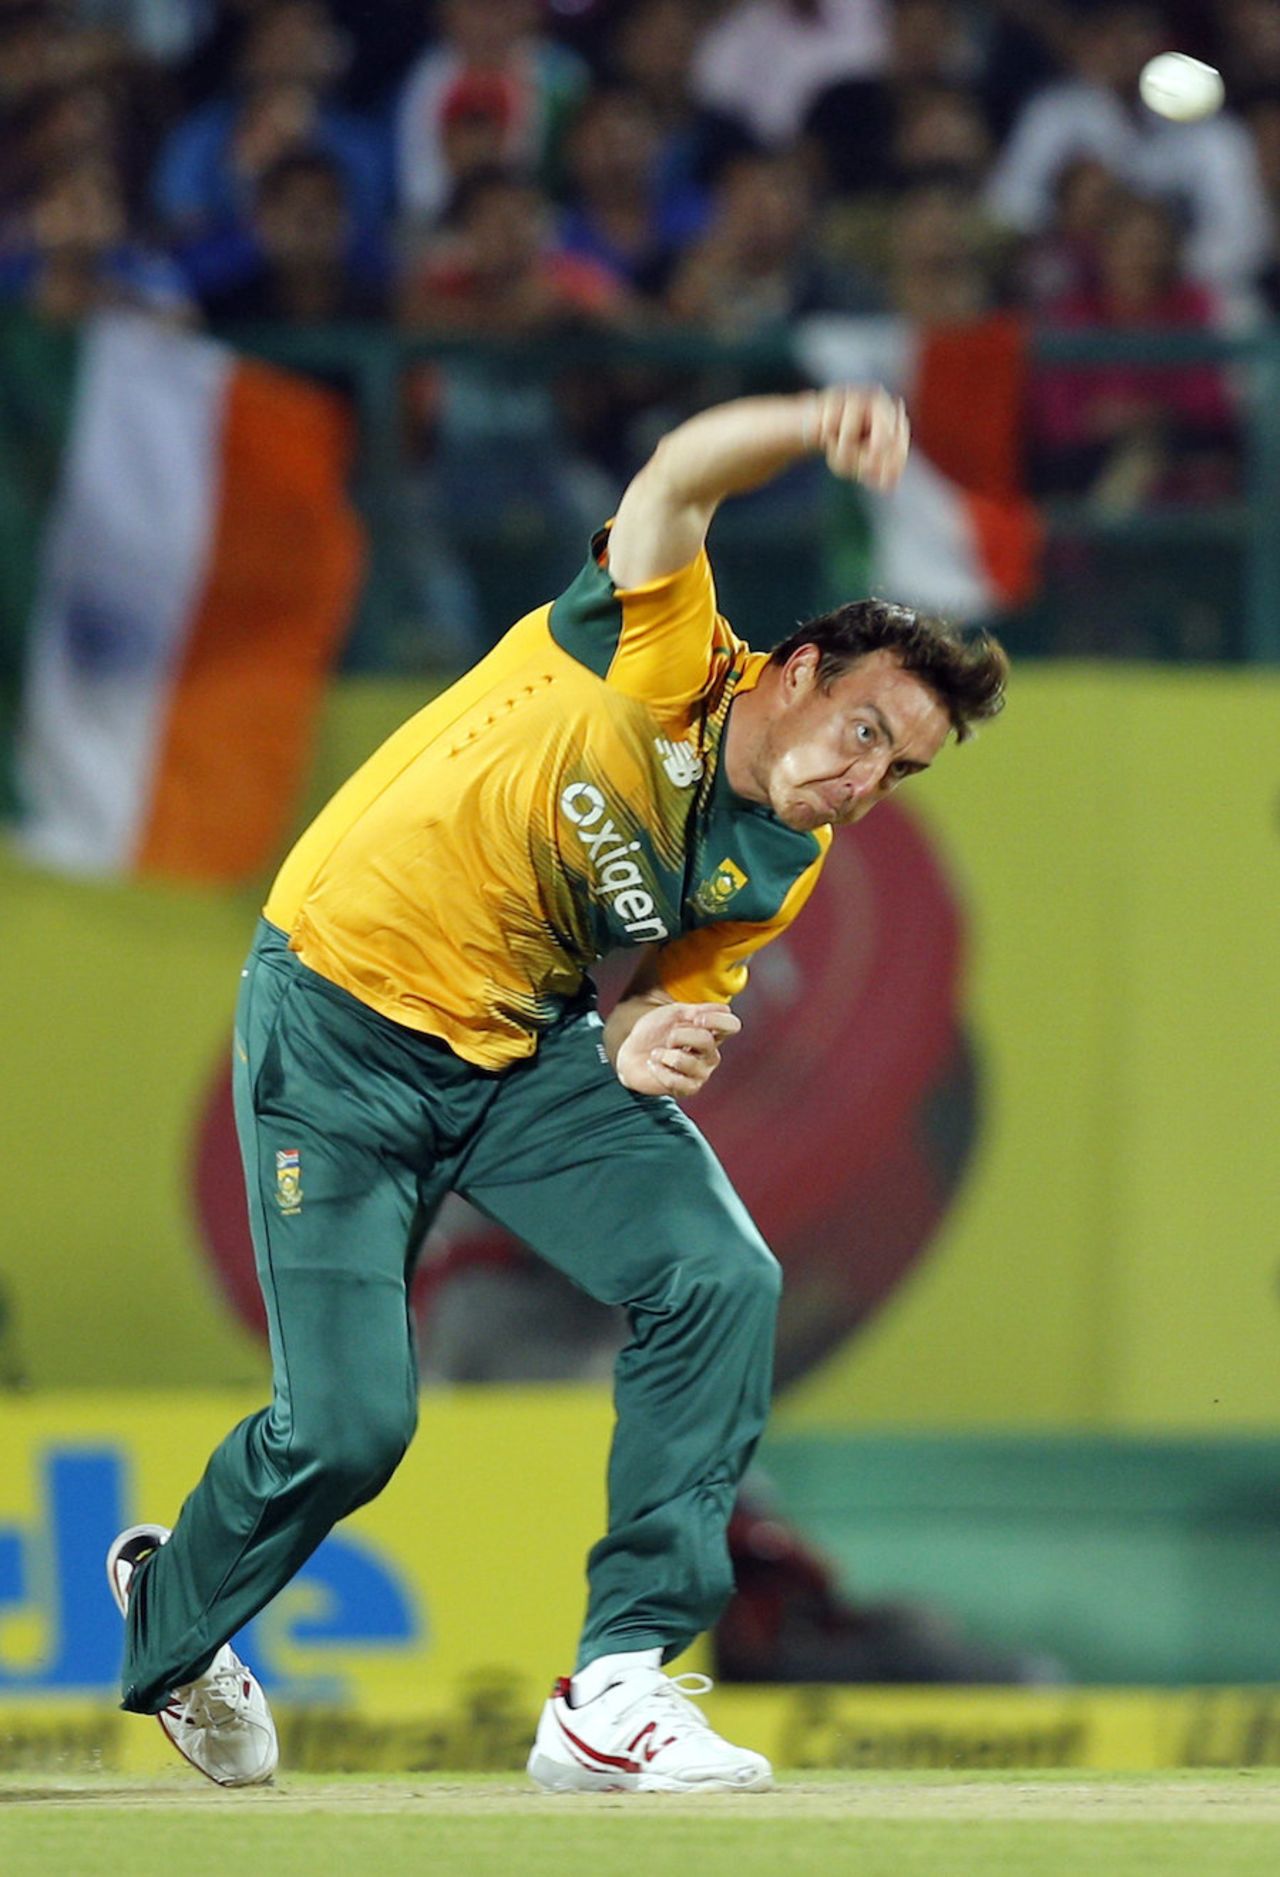 Kyle Abbott opened the bowling, India v South Africa, 1st T20, Dharamsala, October 2, 2015